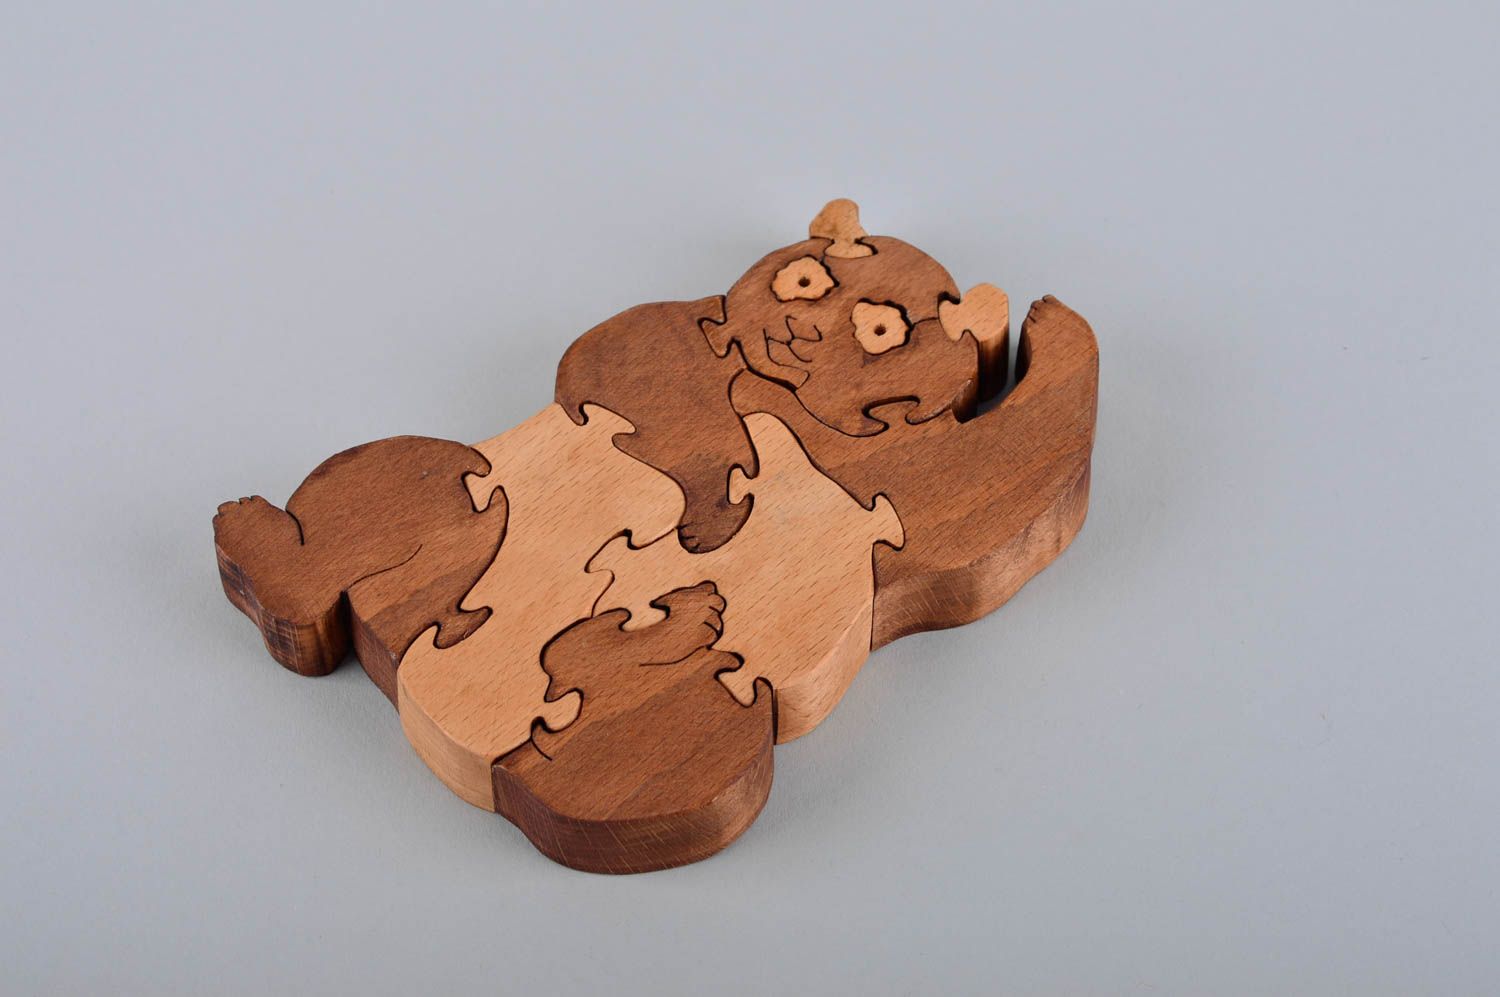 Handmade puzzles unusual toy wooden pazzles designer toy for girls gift ideas photo 4